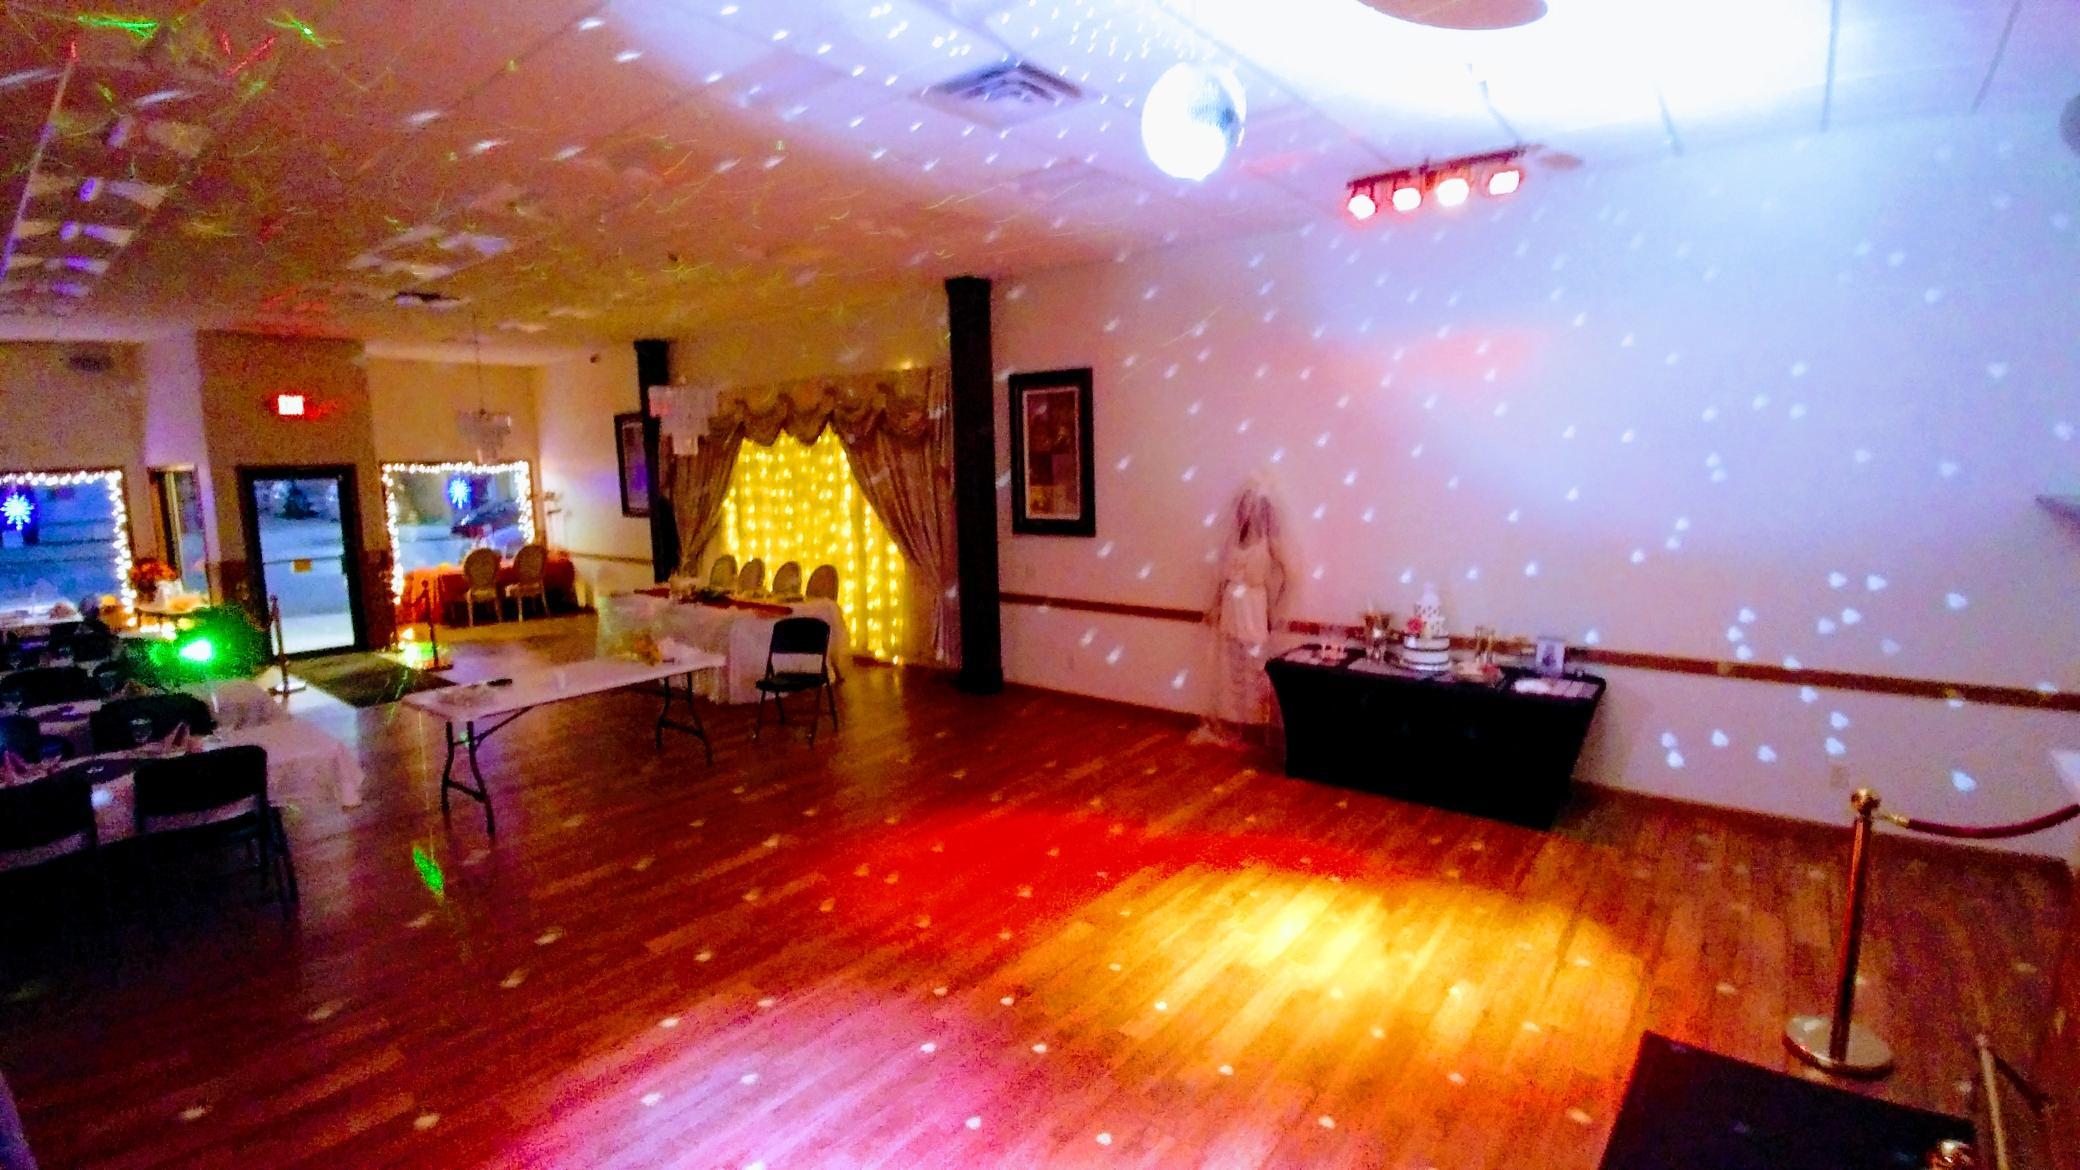 Fantastic venue for wedding receptions, holiday parties and so many others!